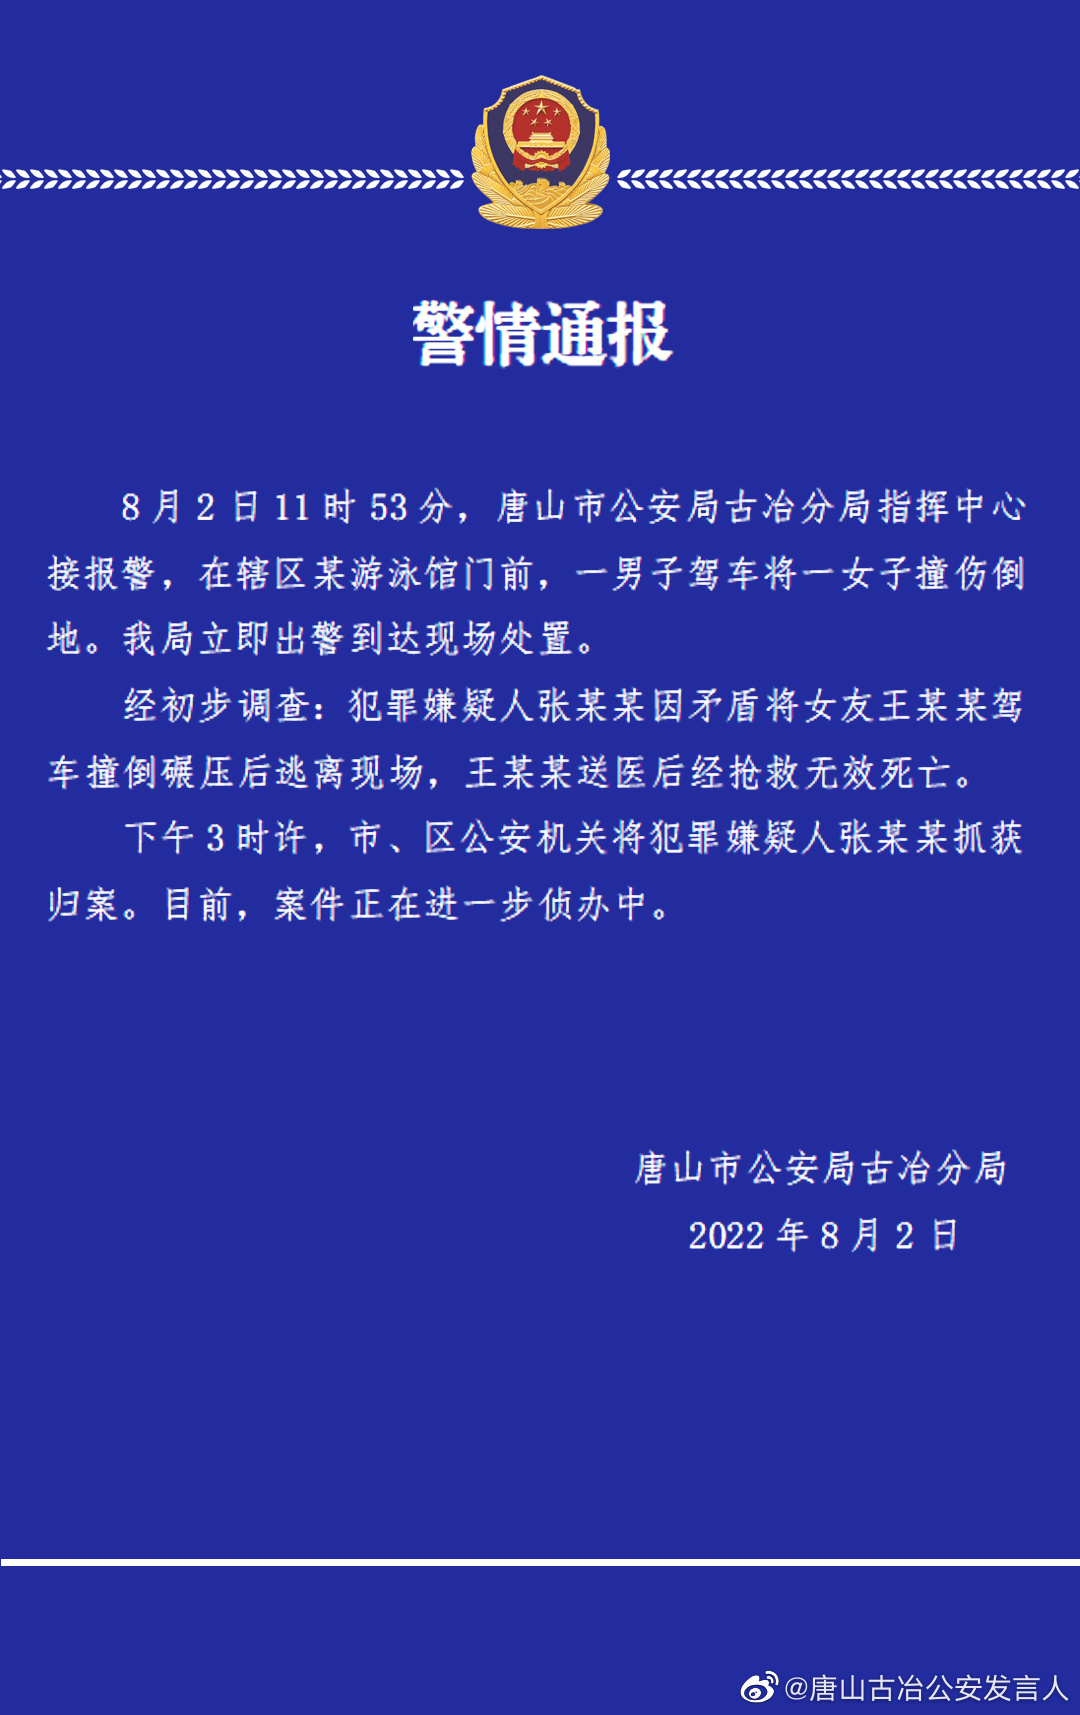 Statement by china police